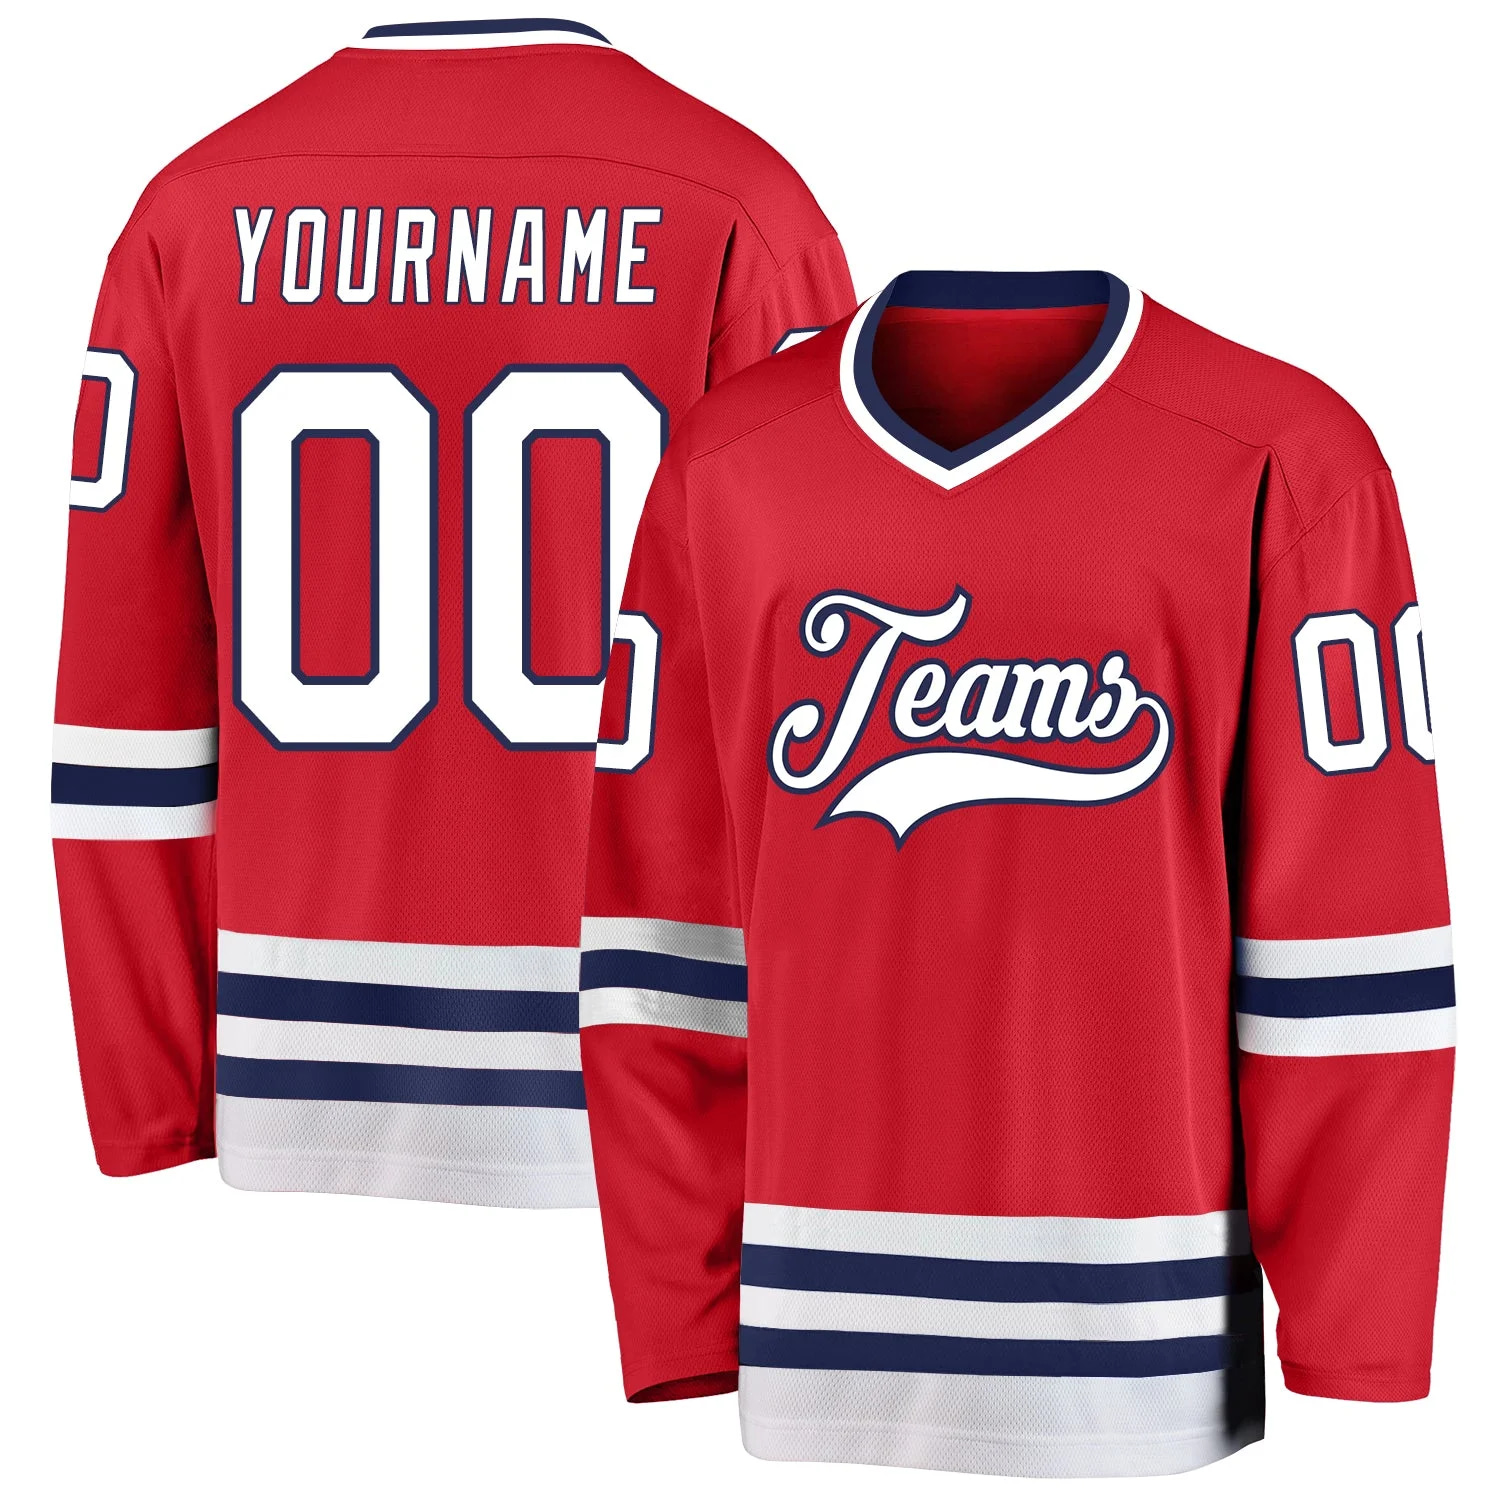 Stitched And Print Red White-navy Hockey Jersey Custom